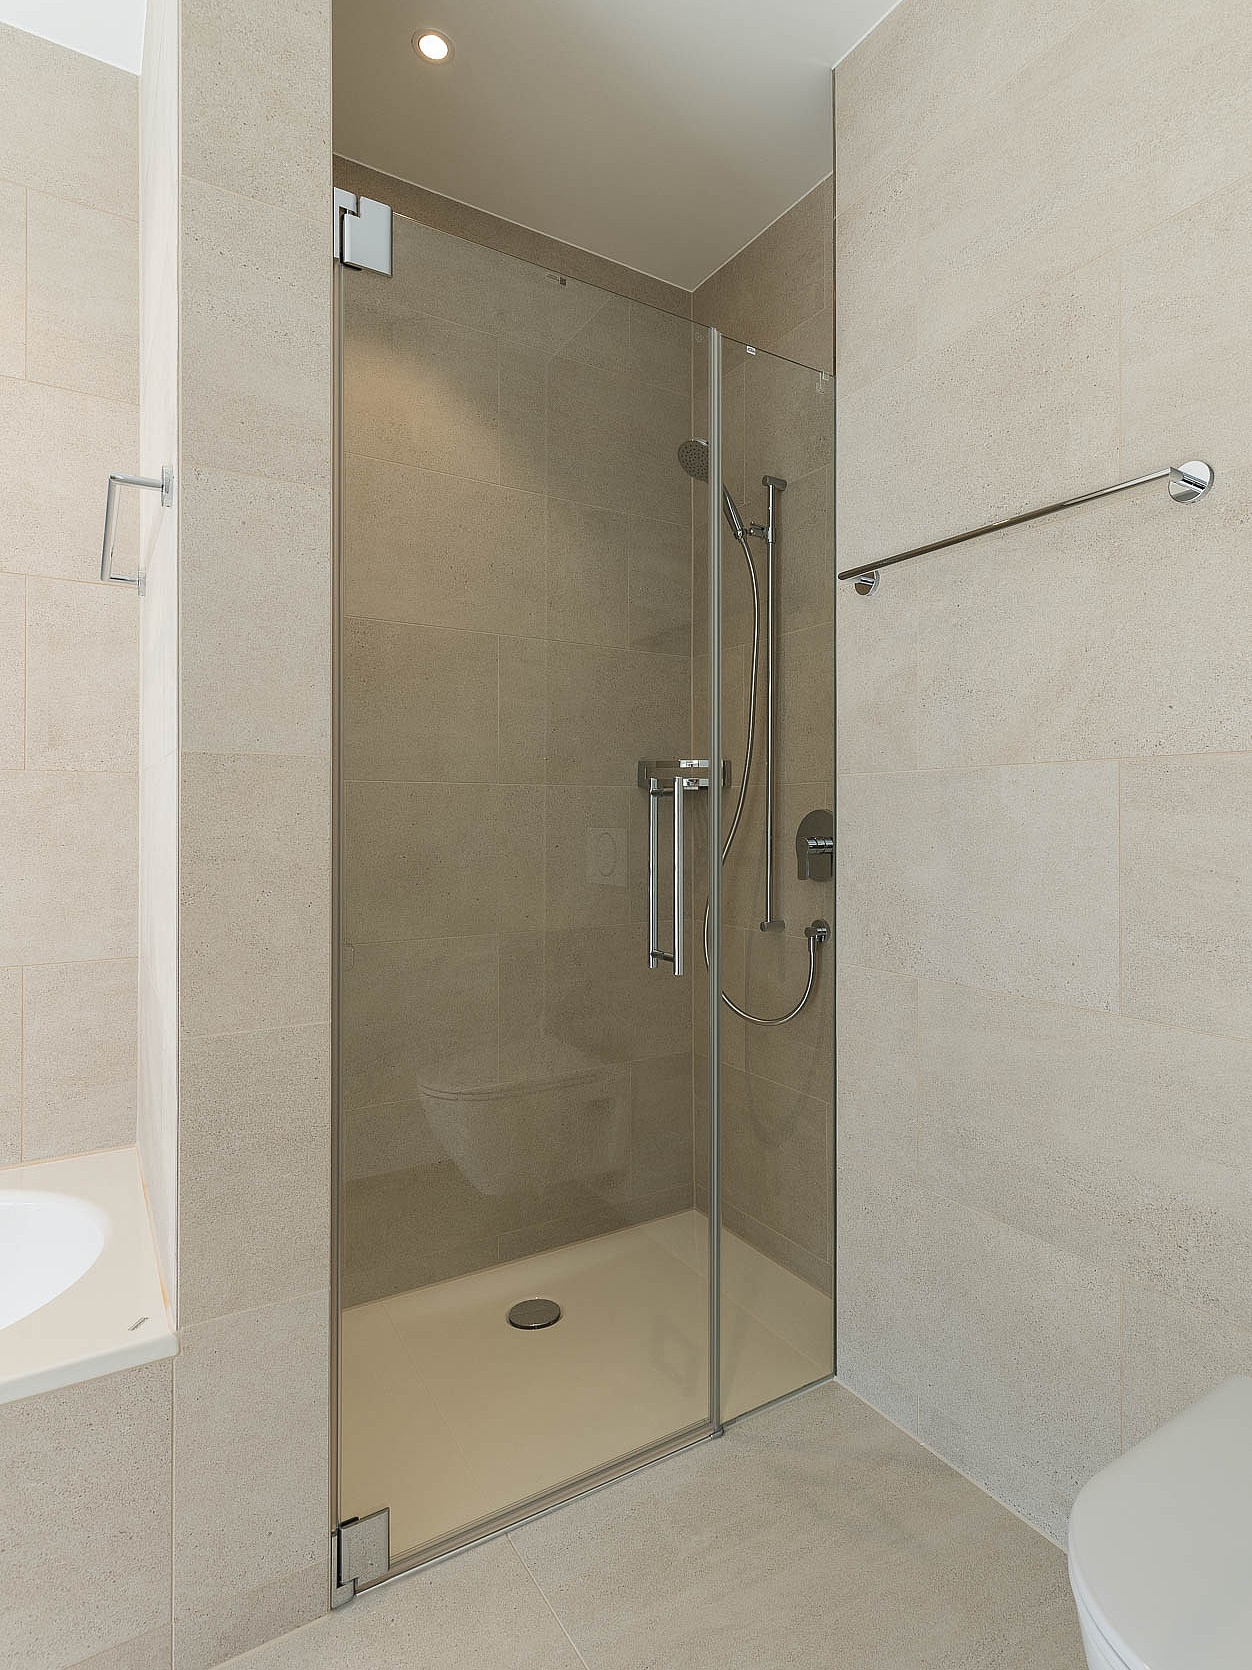 Kermi shower design reference object SEEPARK PASA hinged shower enclosure in niche